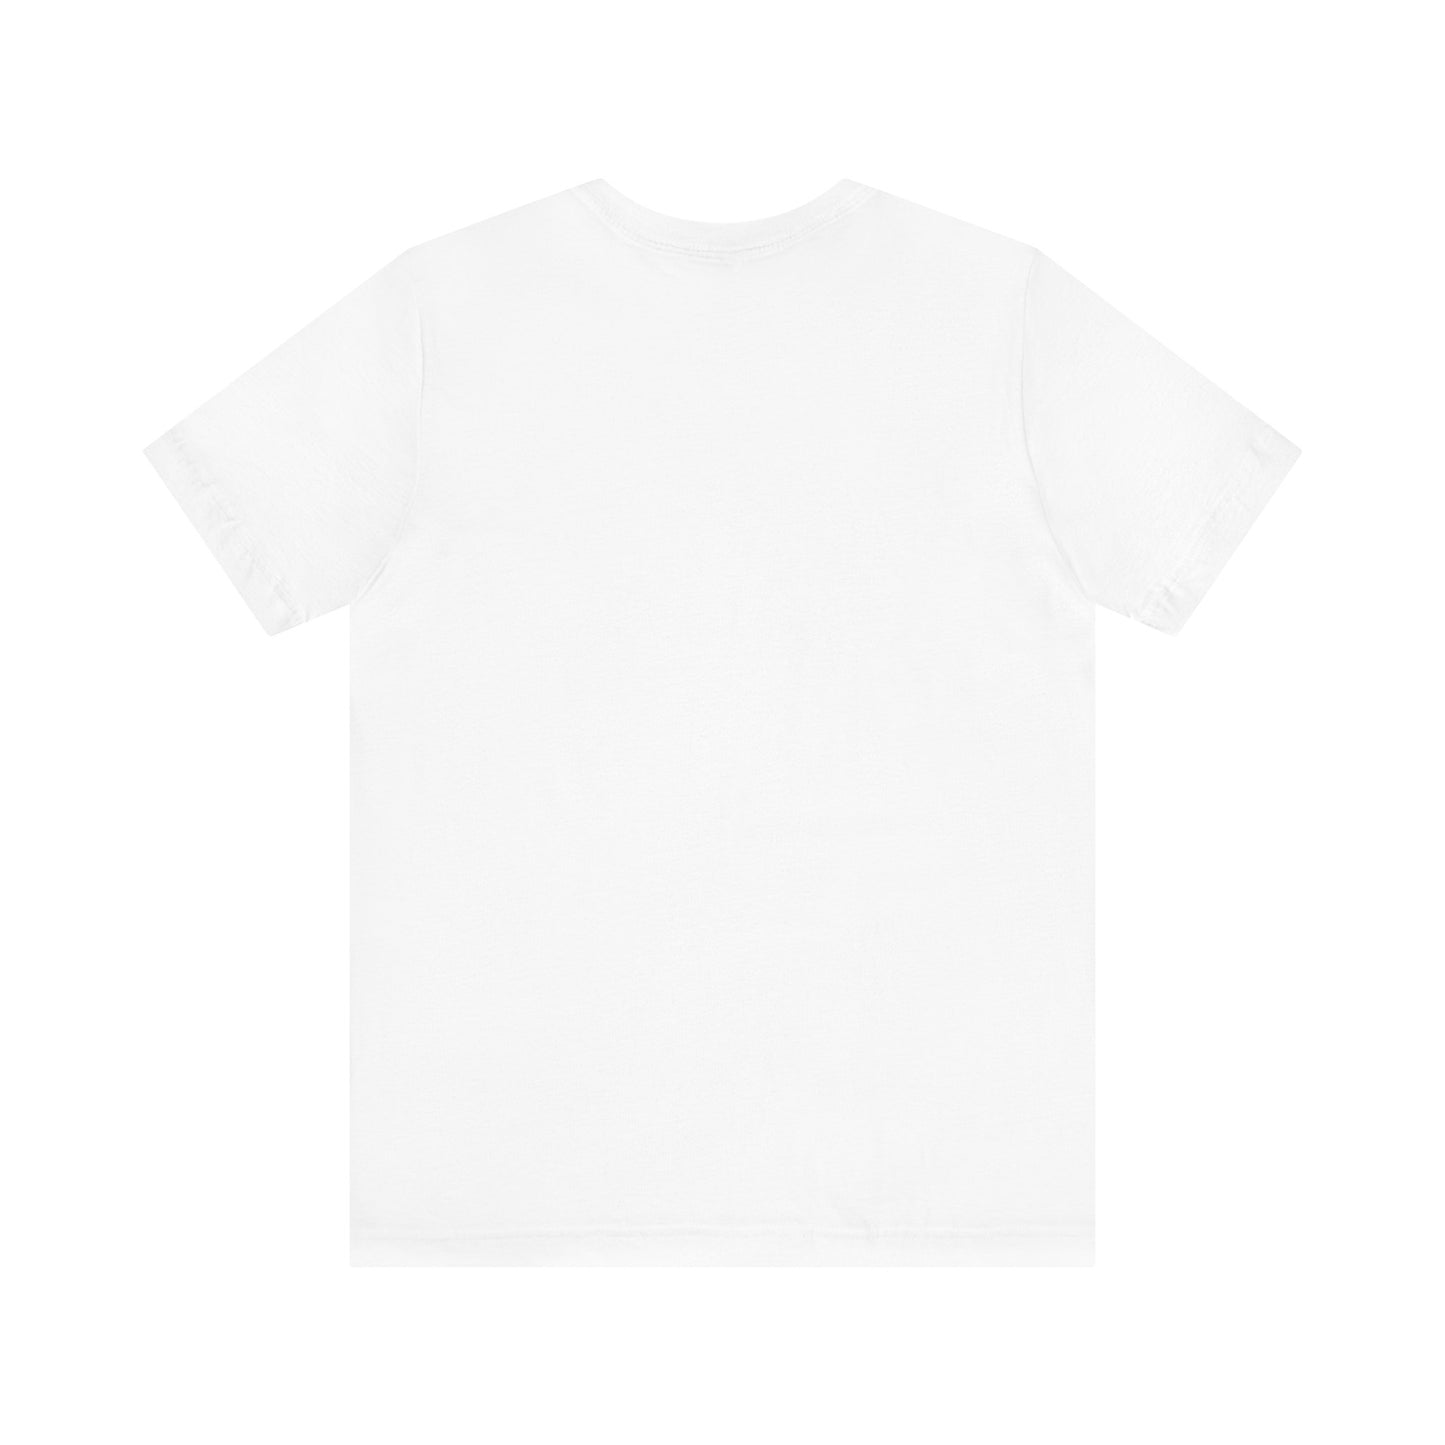 The Discount Seafood Warehouse Tee